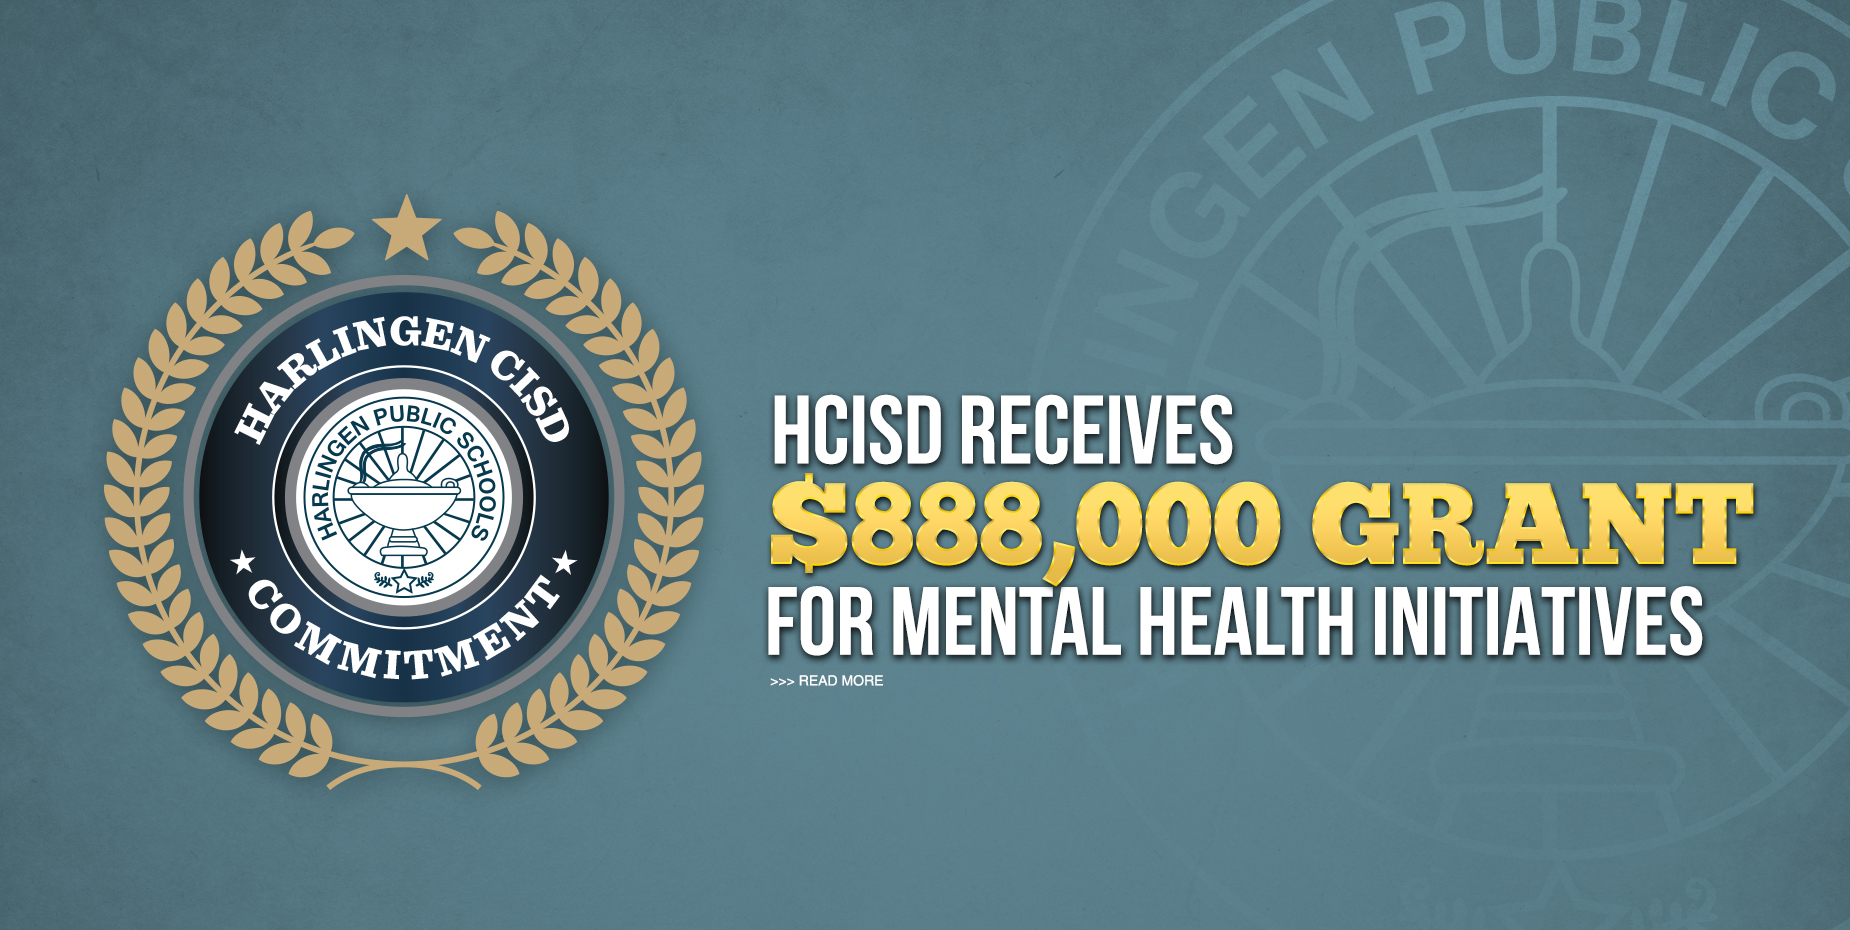 HCISD receives $888,000 grant for mental health initiatives